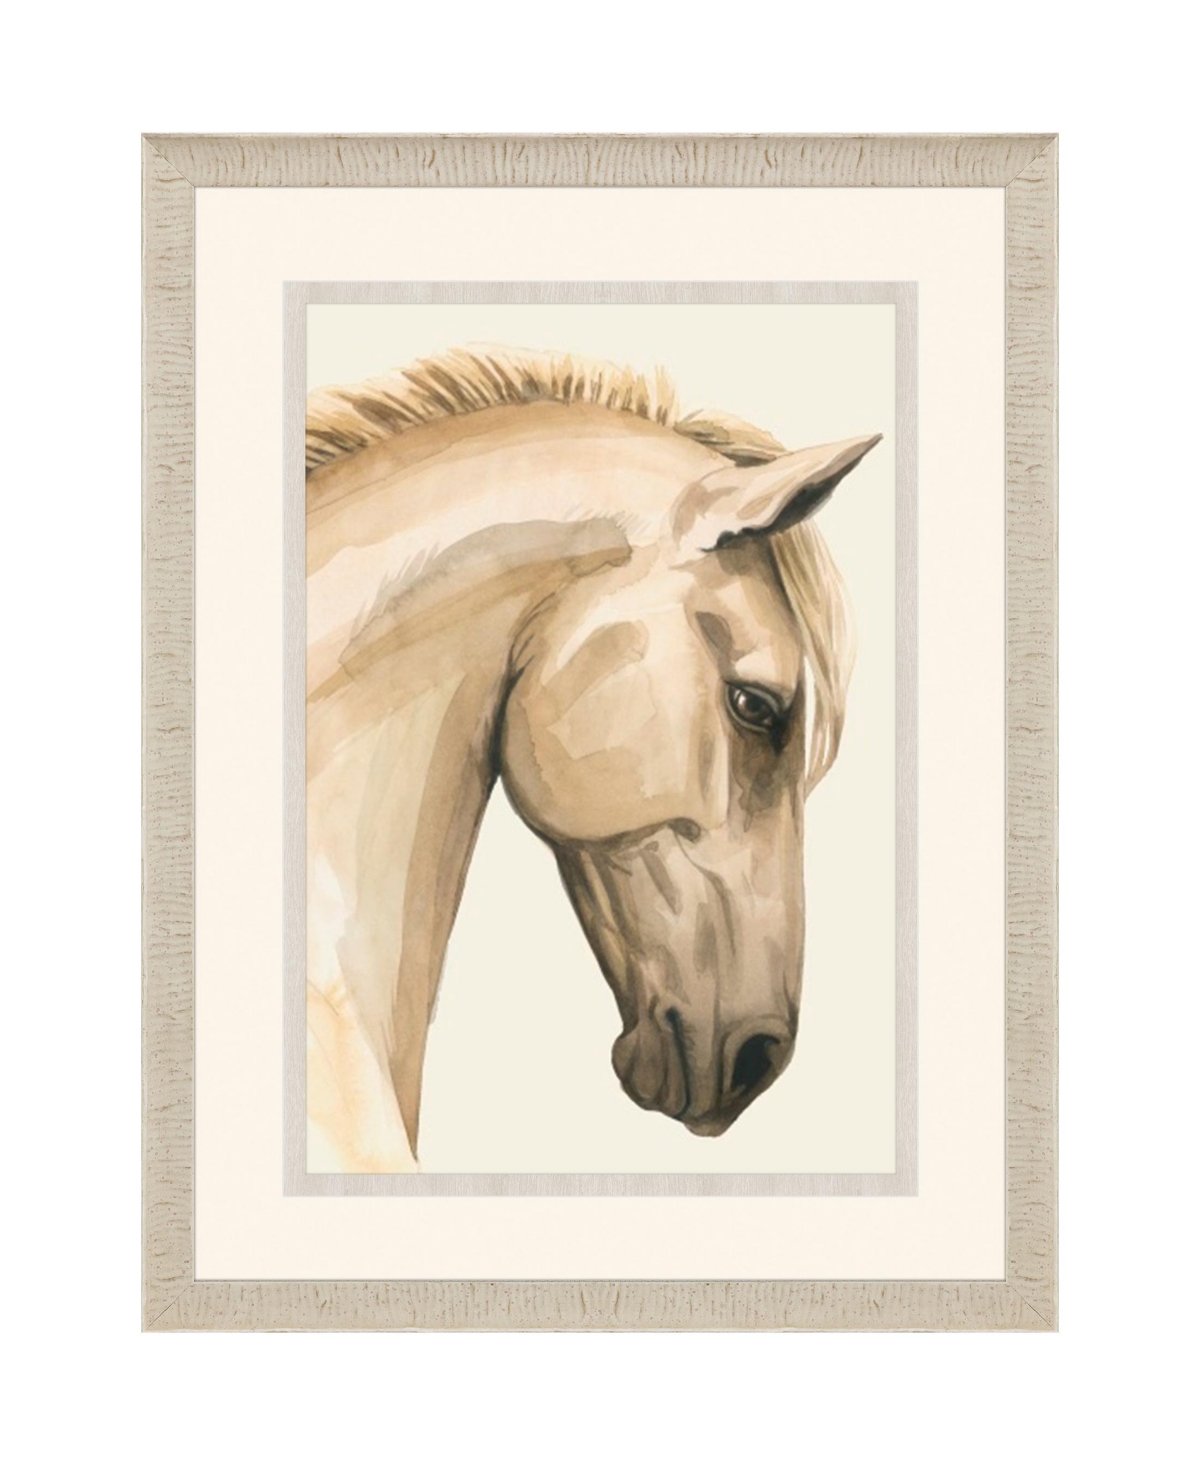 Paragon Picture Gallery Golden Palomino I Framed Art In Beige